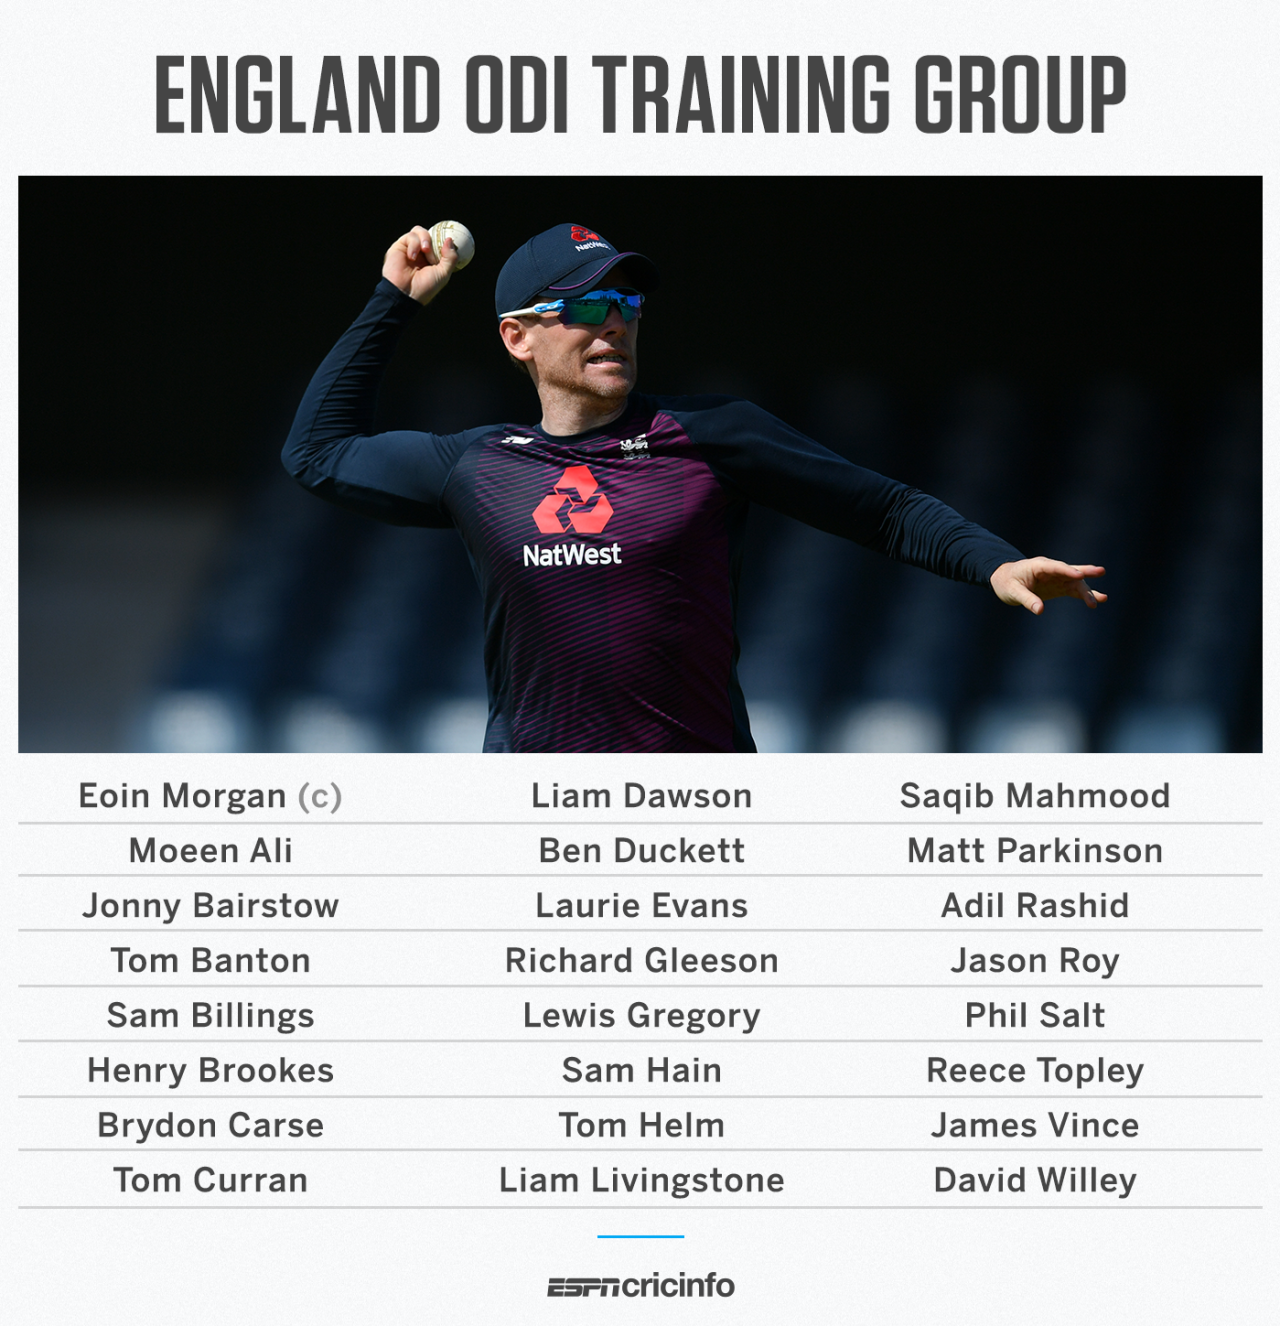 England's behind-closed-doors training squad for the ODI series against Ireland